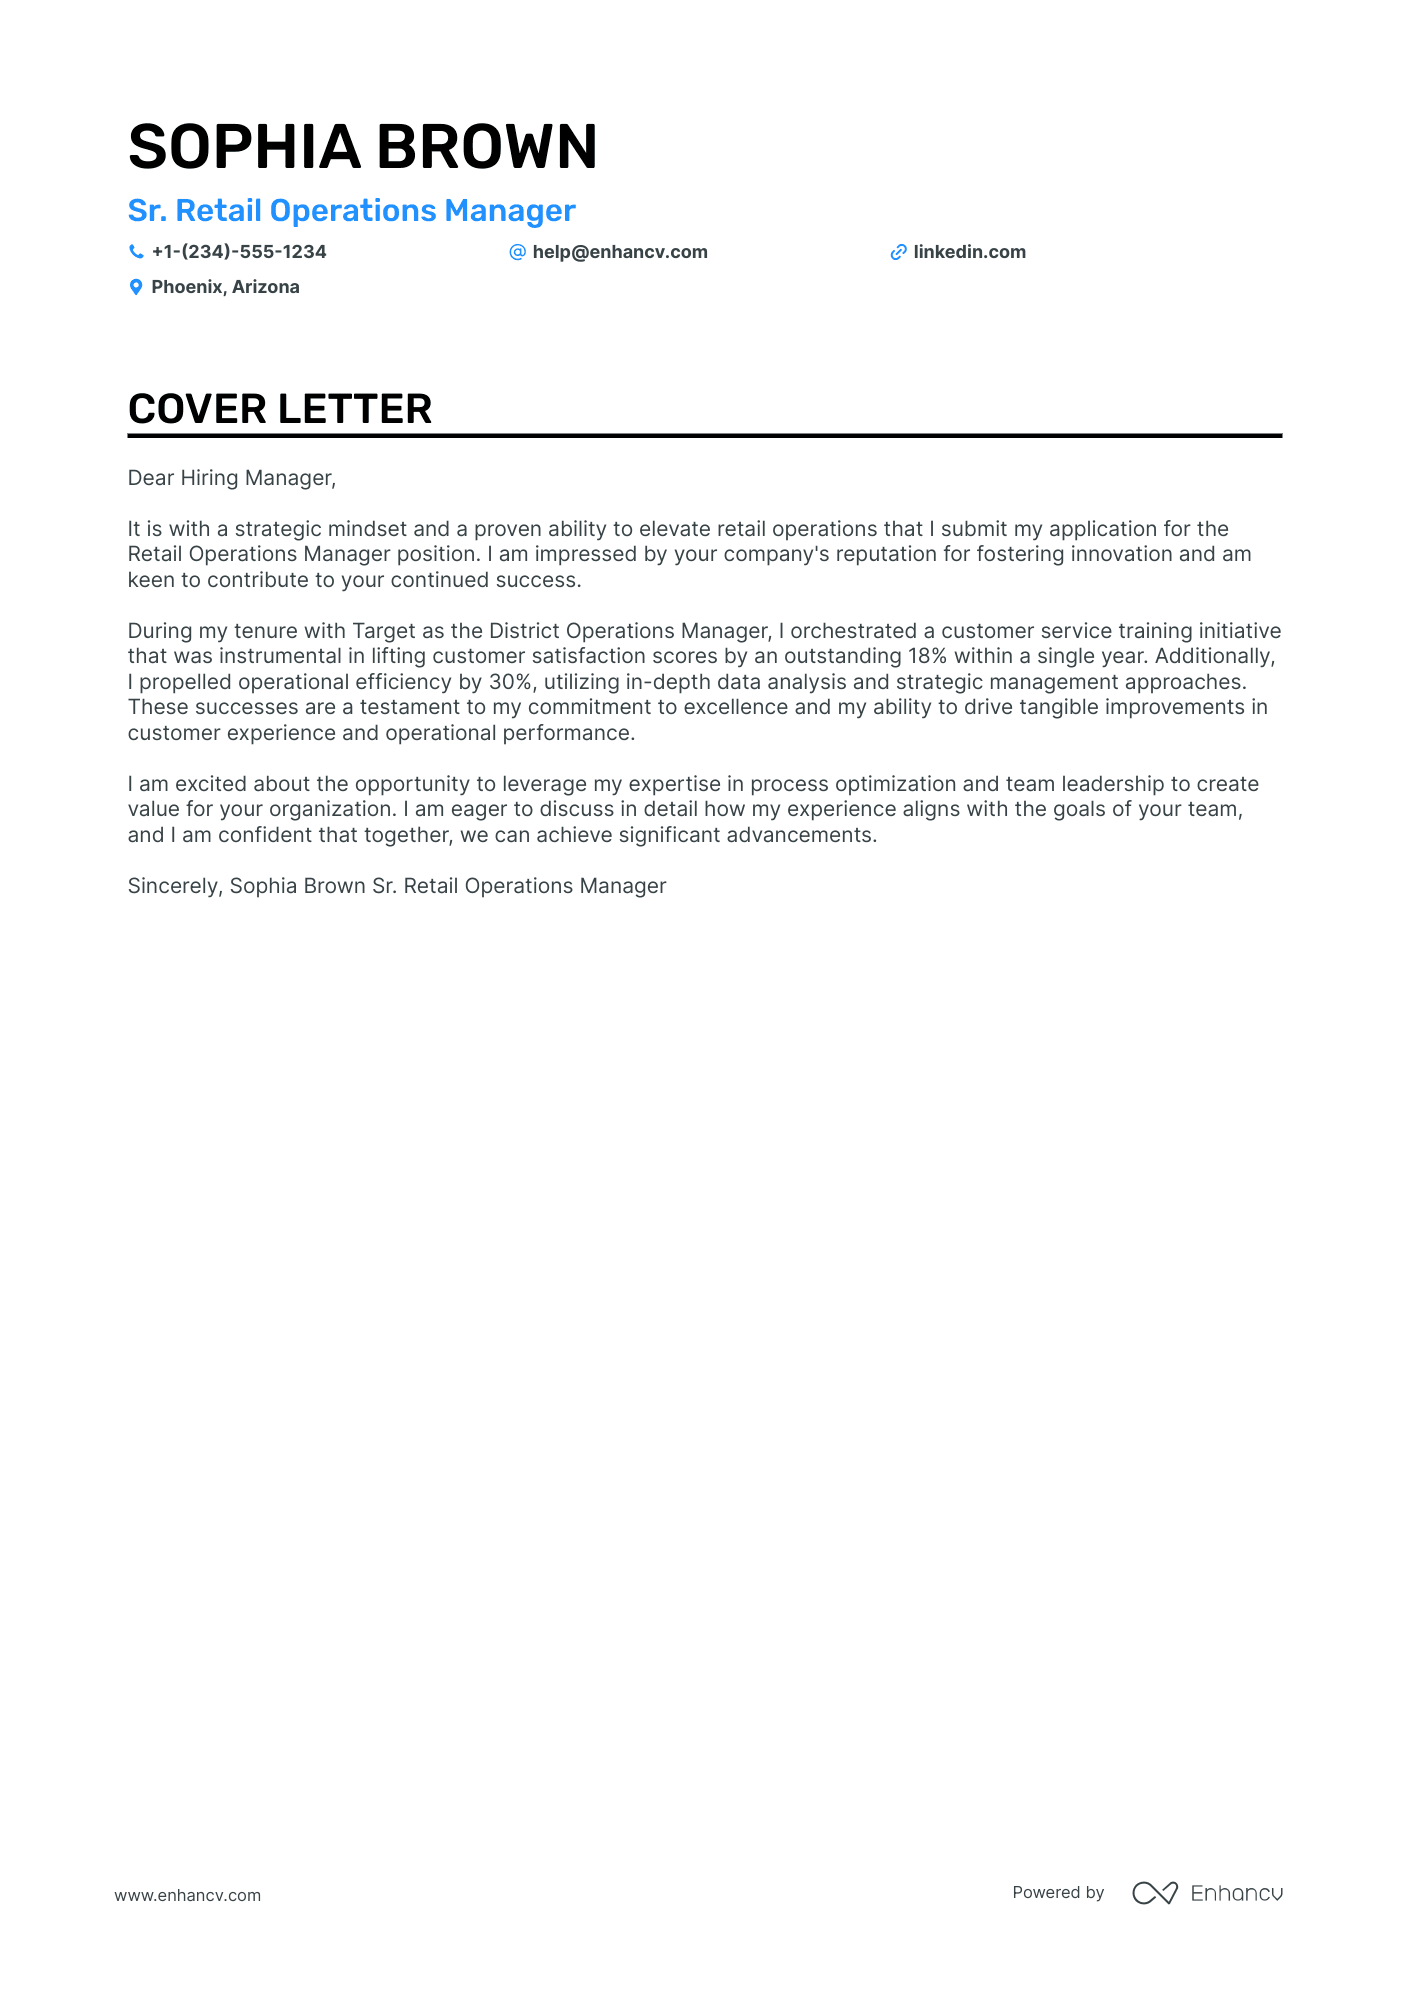 Retail Operations Manager cover letter